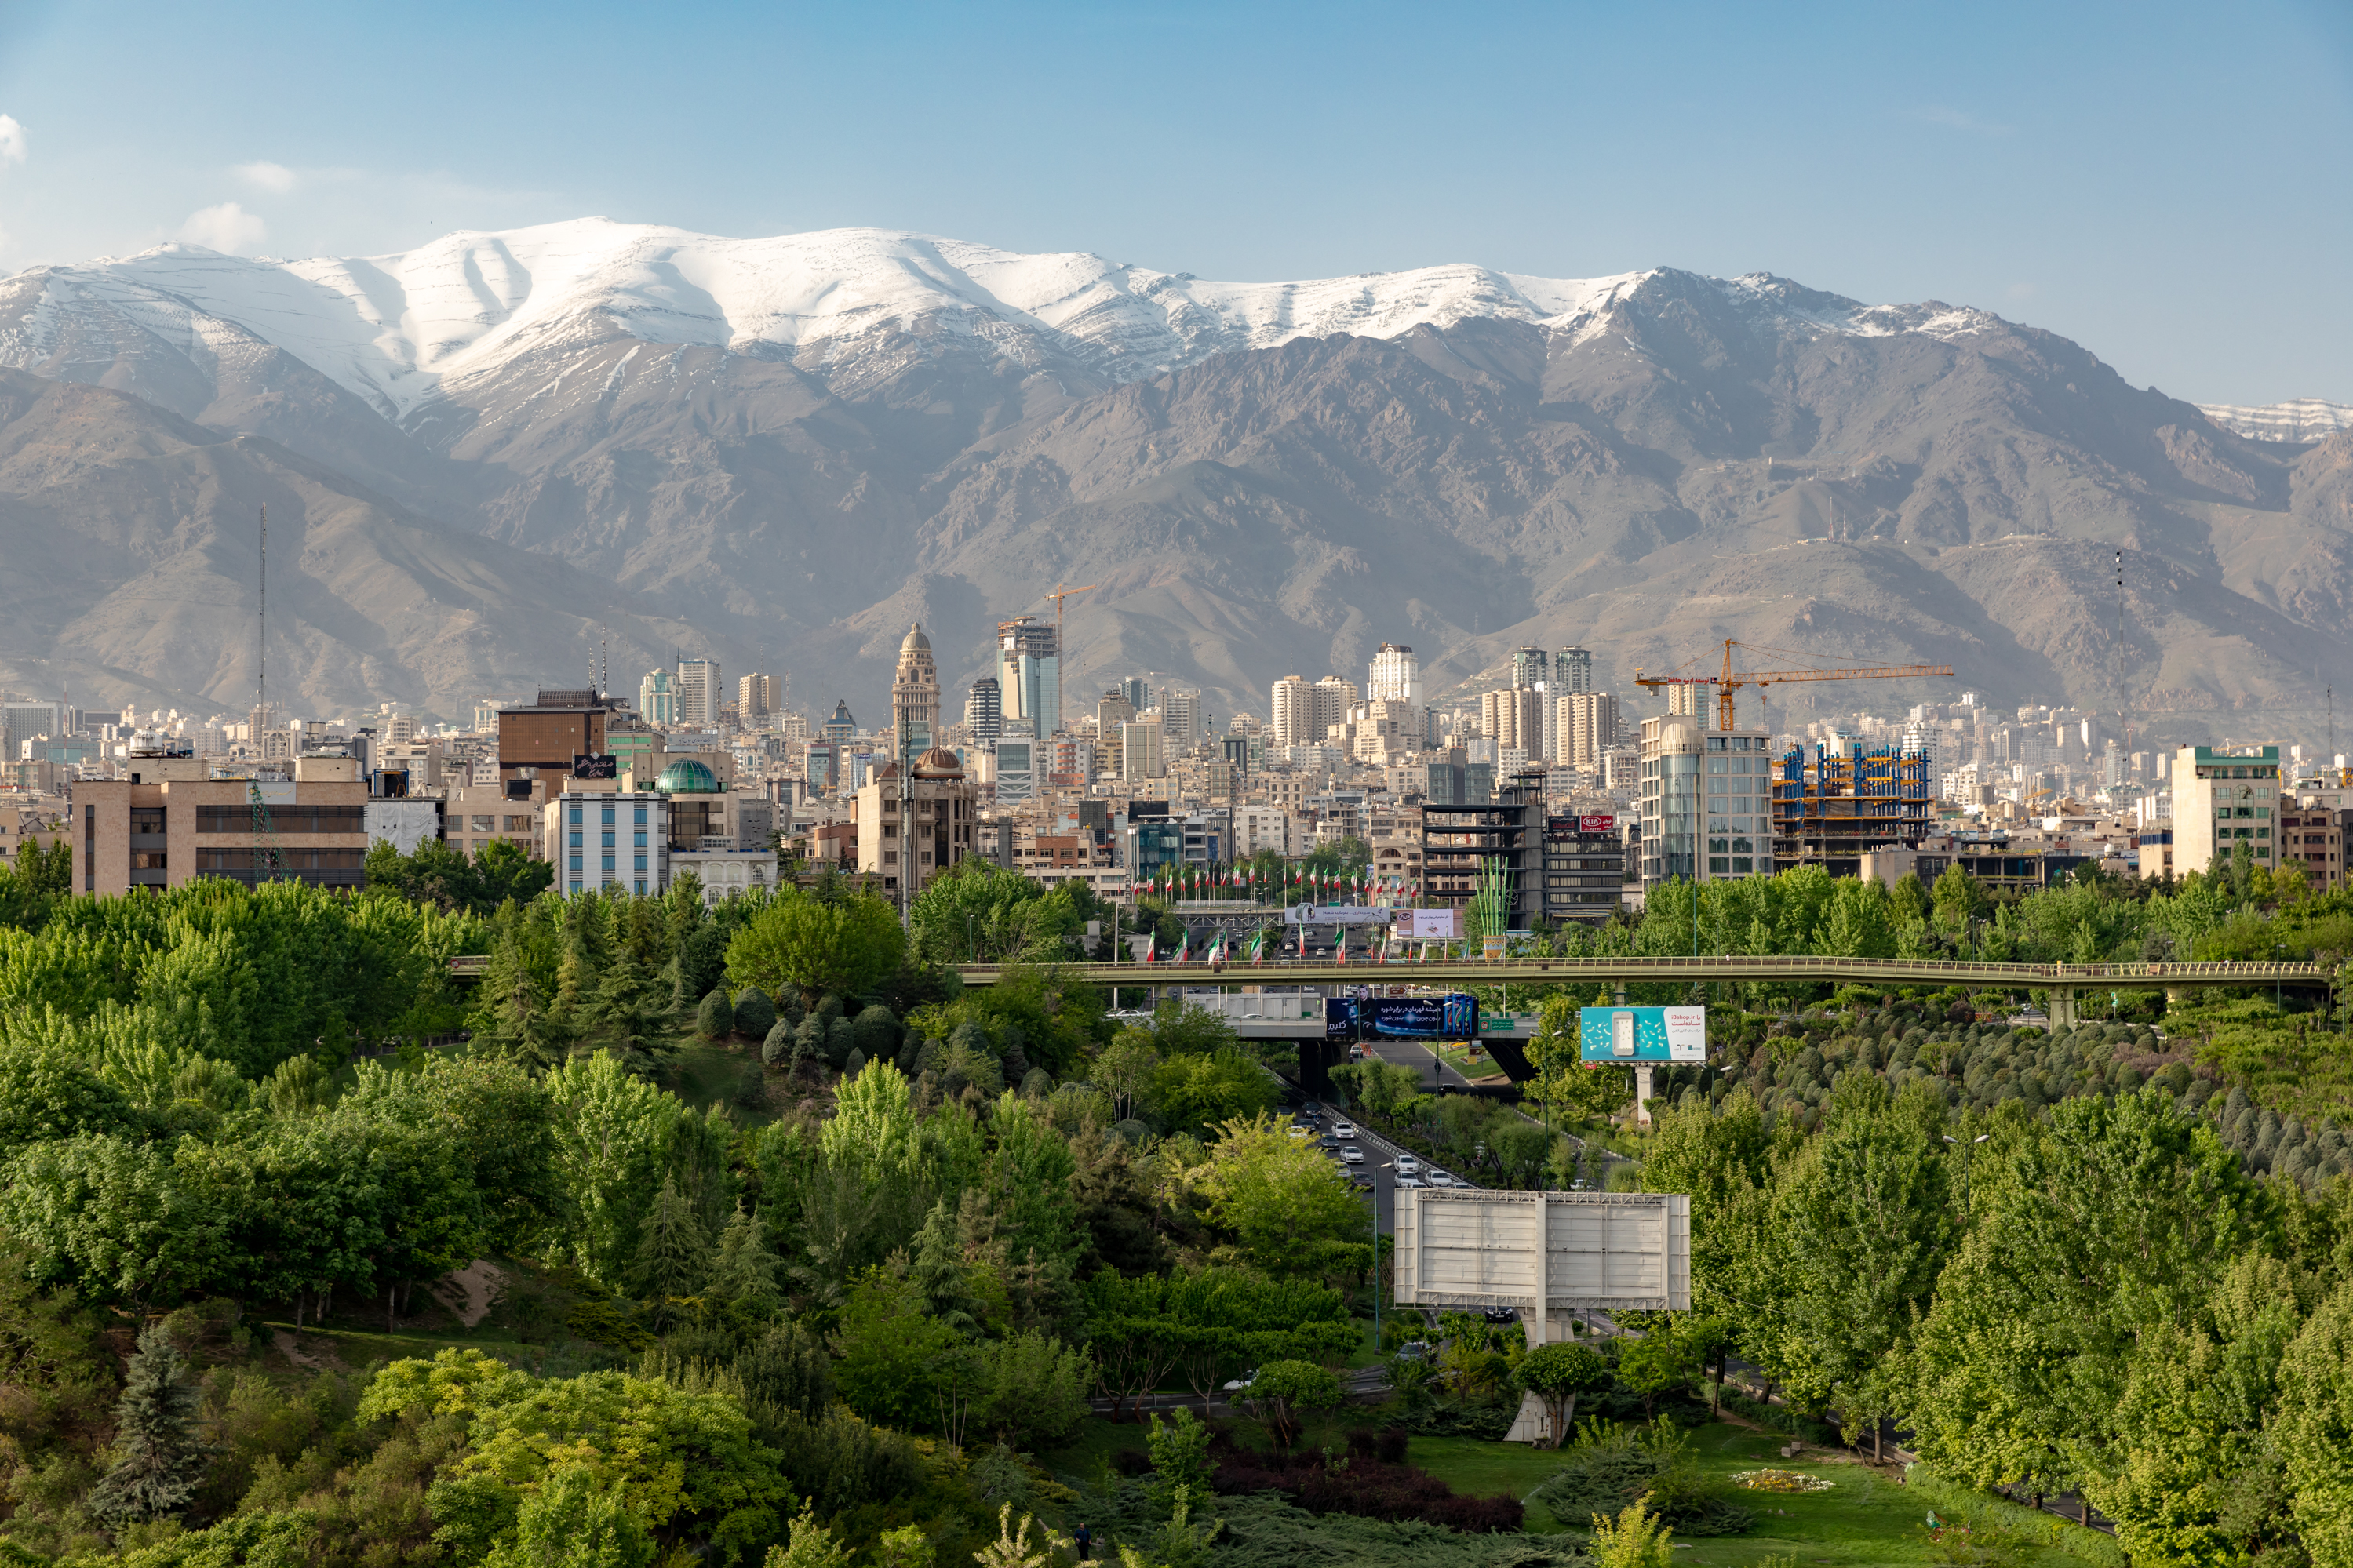 The city of Tehran, juxtaposed with snow-capped mountains in the background.